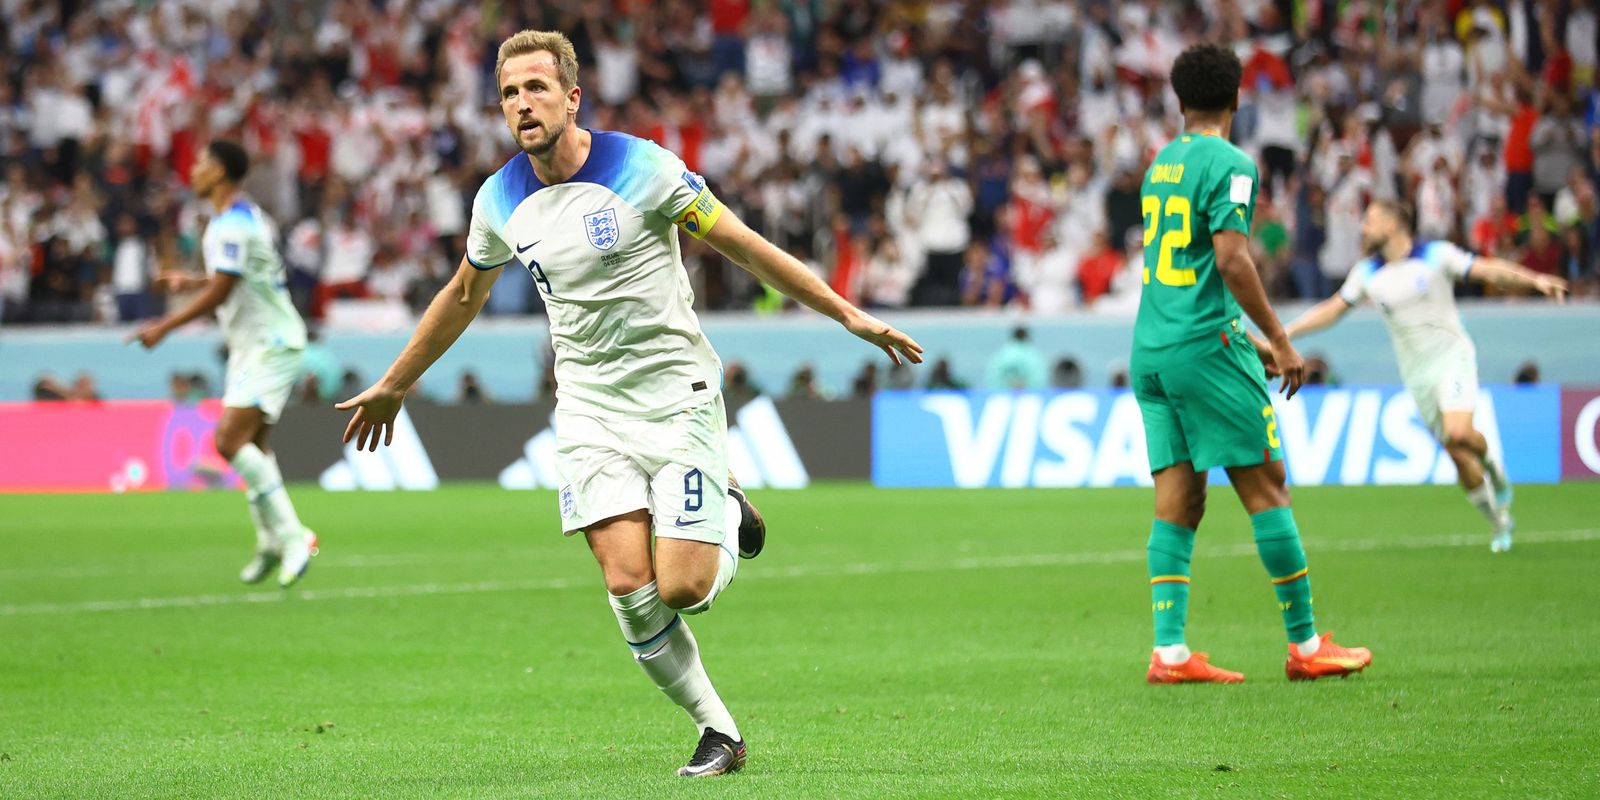 No problem, England dispatches Senegal and takes on France in the quarterfinals